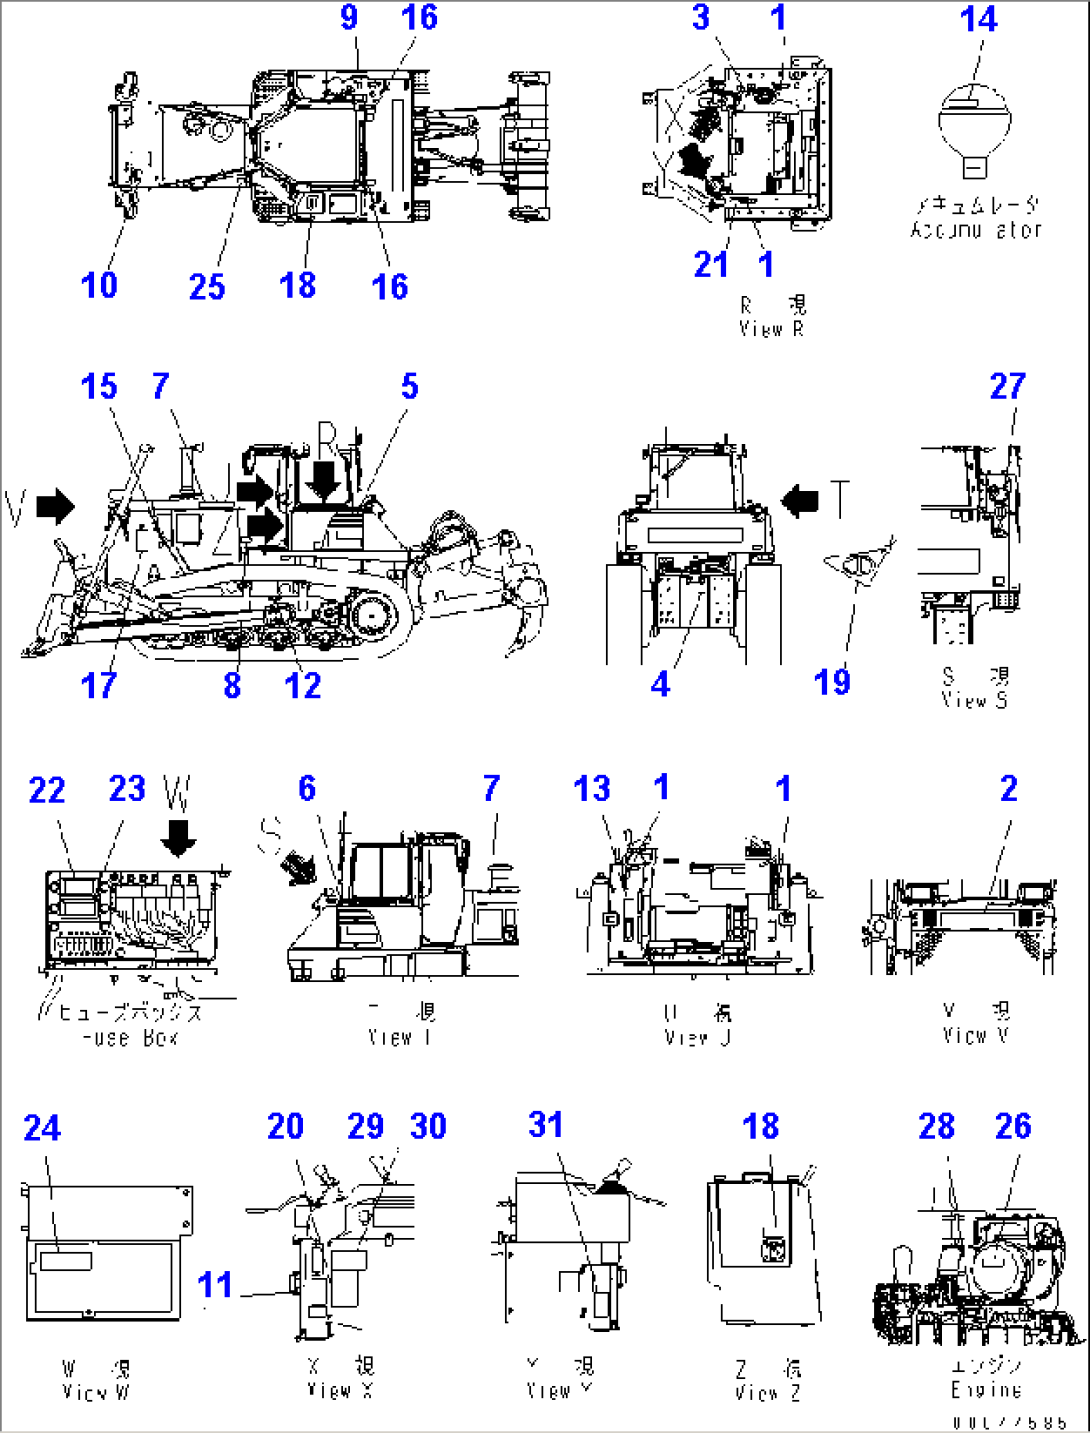 MARKS AND PLATES (GERMAN)(#80001-80806)